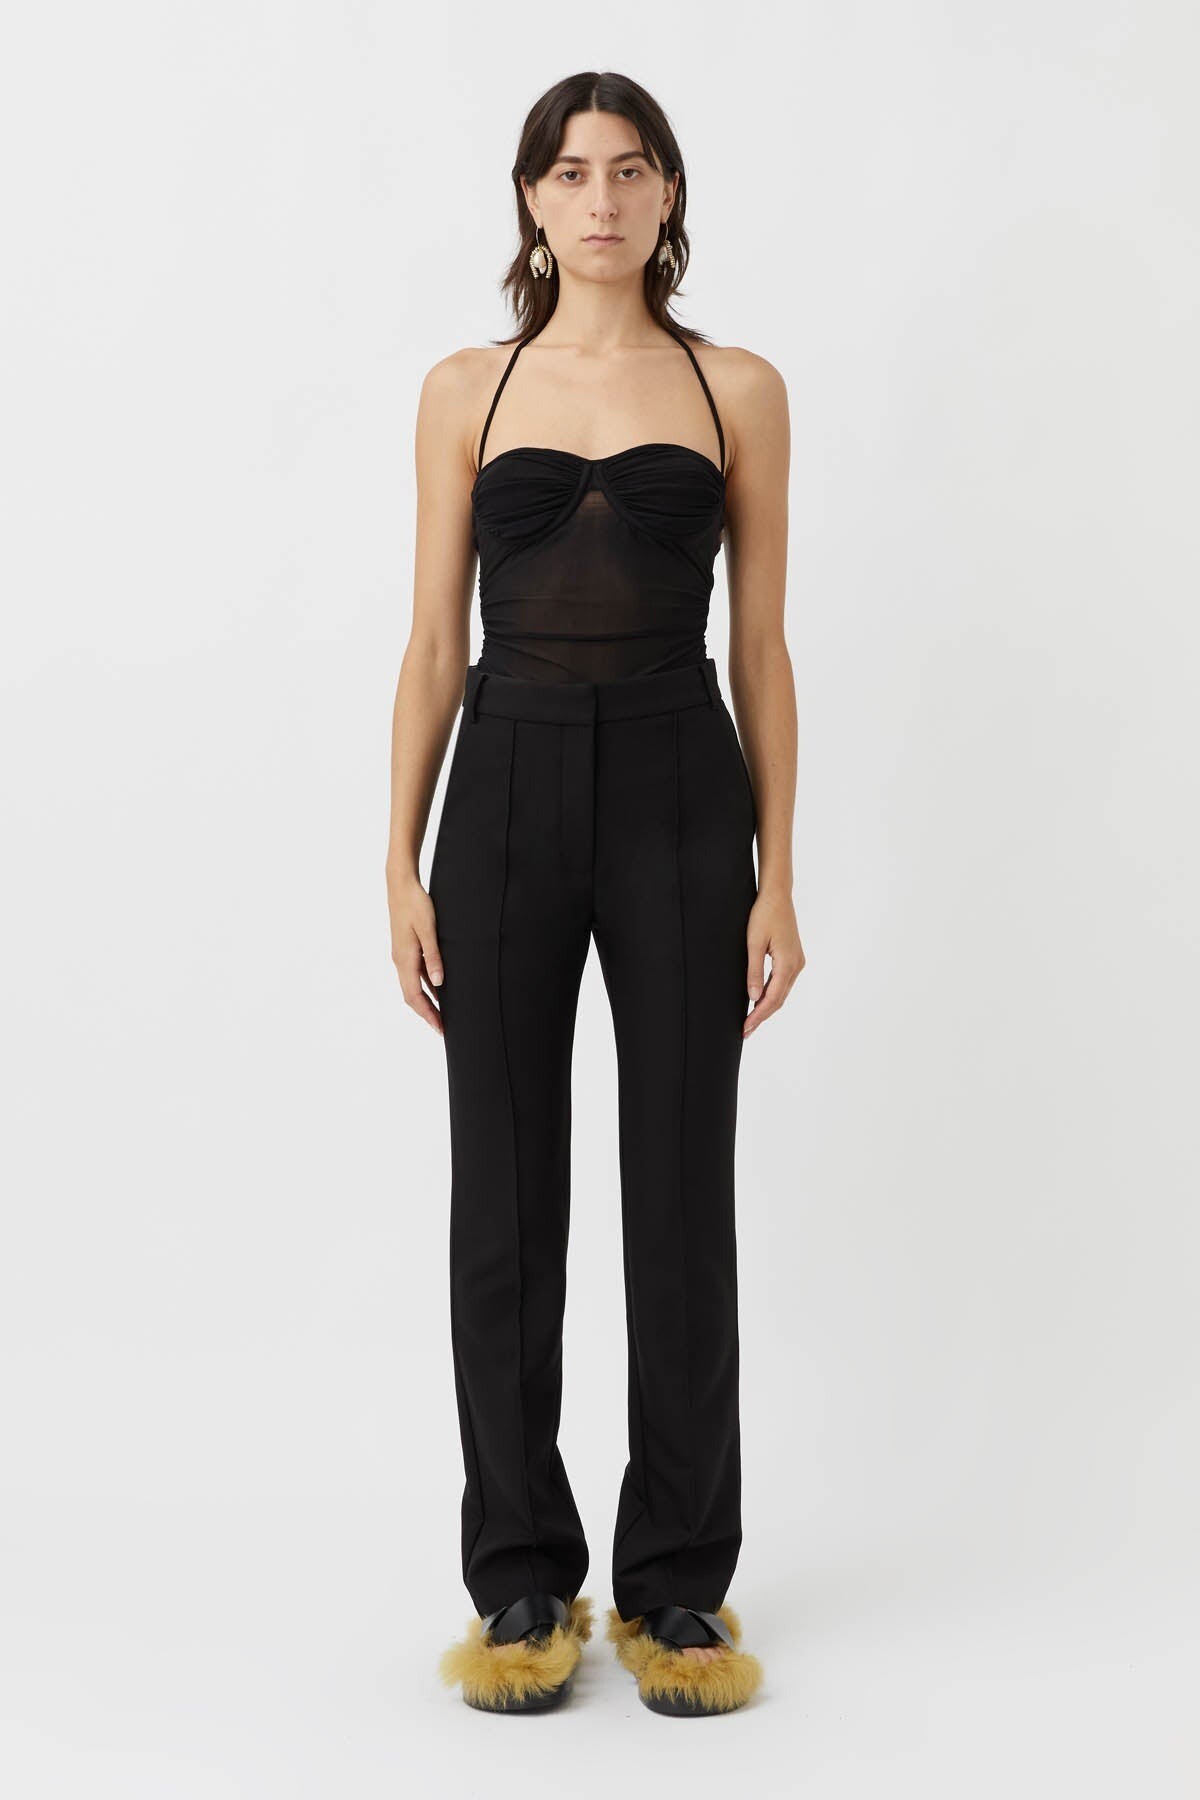 Black Strapless Camisole by CAMILLA AND MARC on Sale